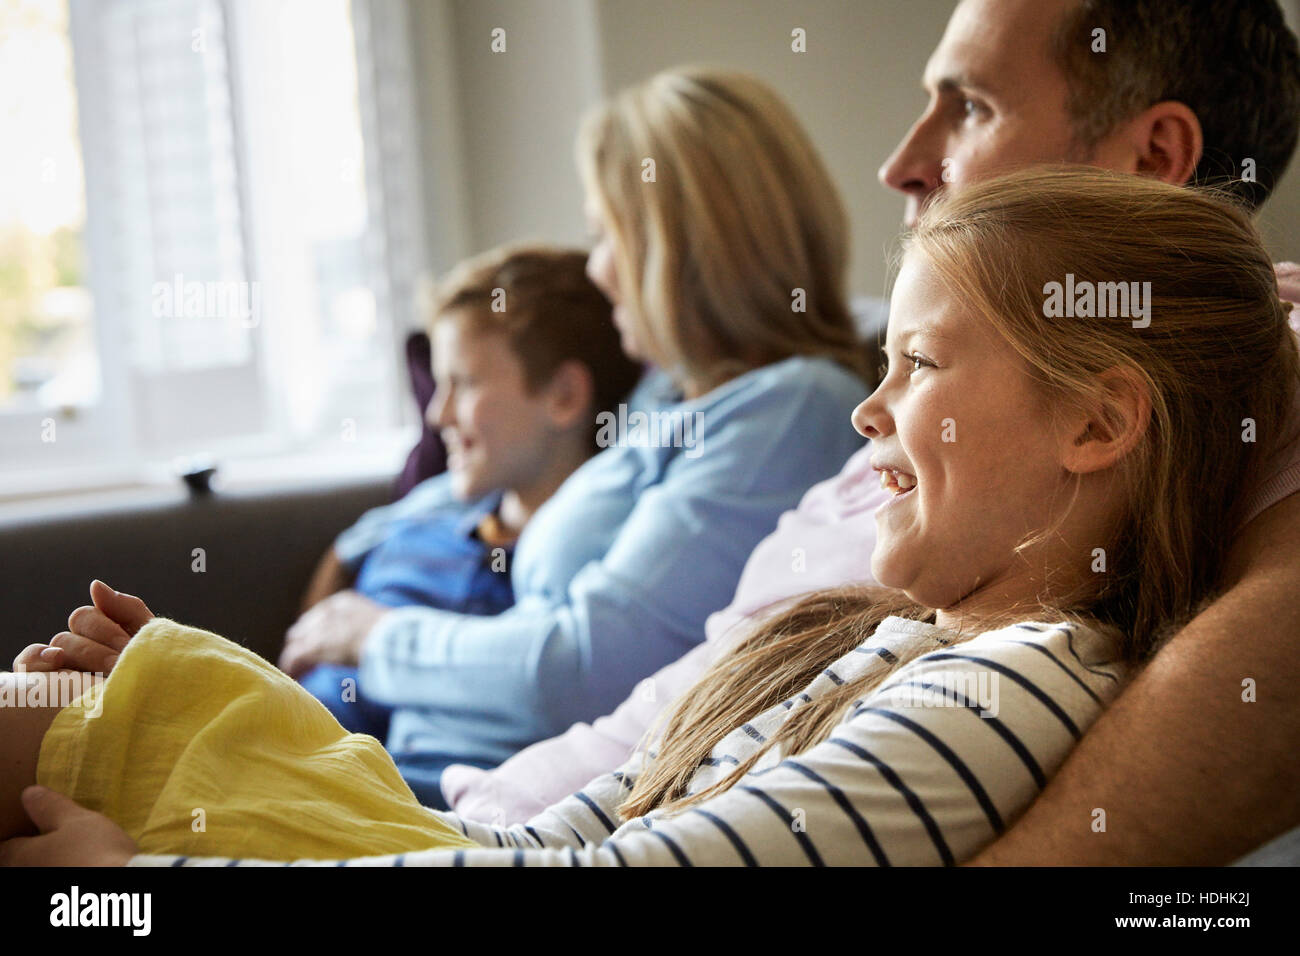 A family at home. Two adults and two children seated on a sofa together. Stock Photo